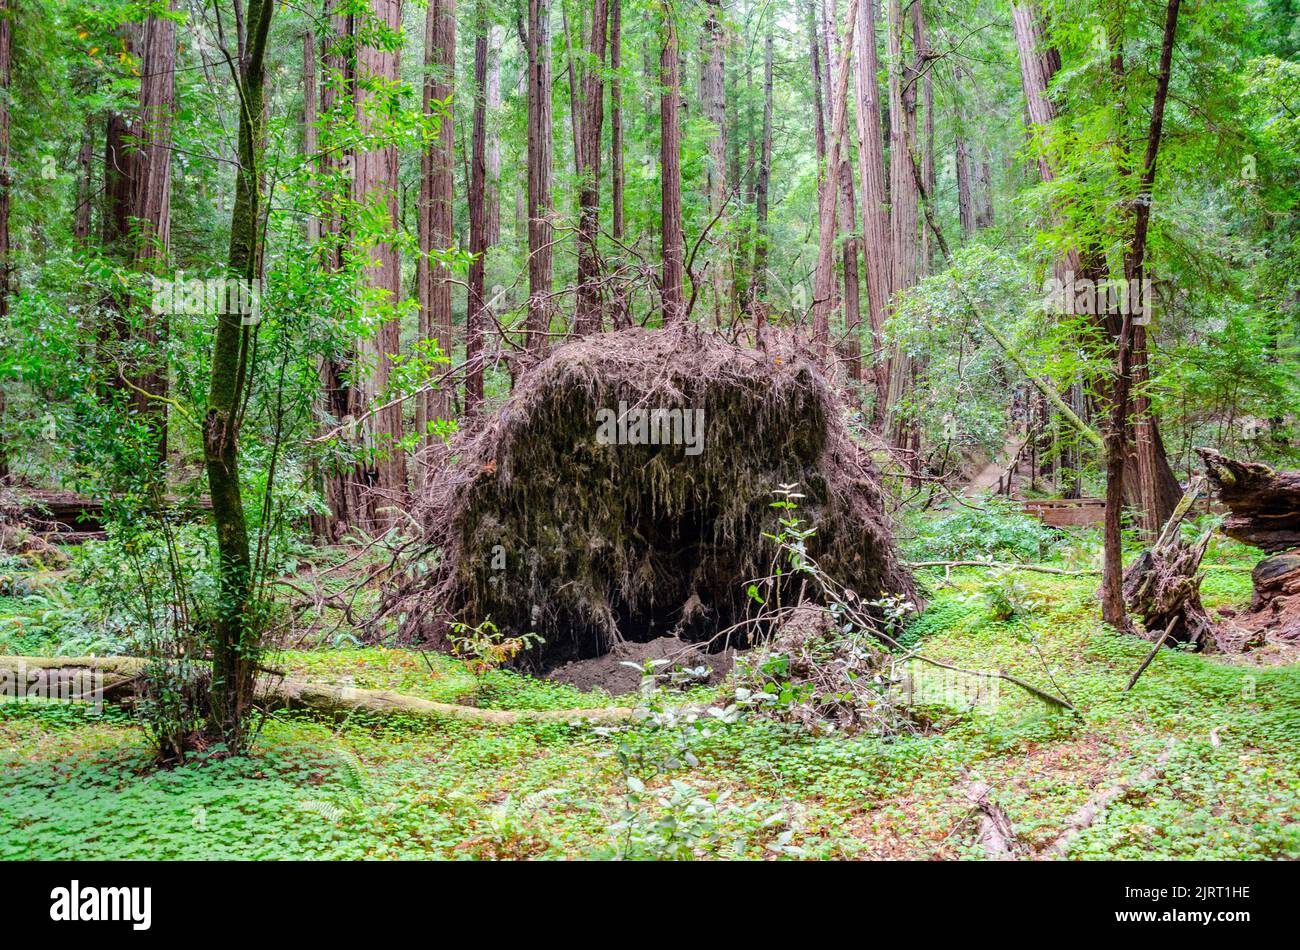 A giant redwood sequoia tree has fallen in a forest in Marin County, California, USA Stock Photo